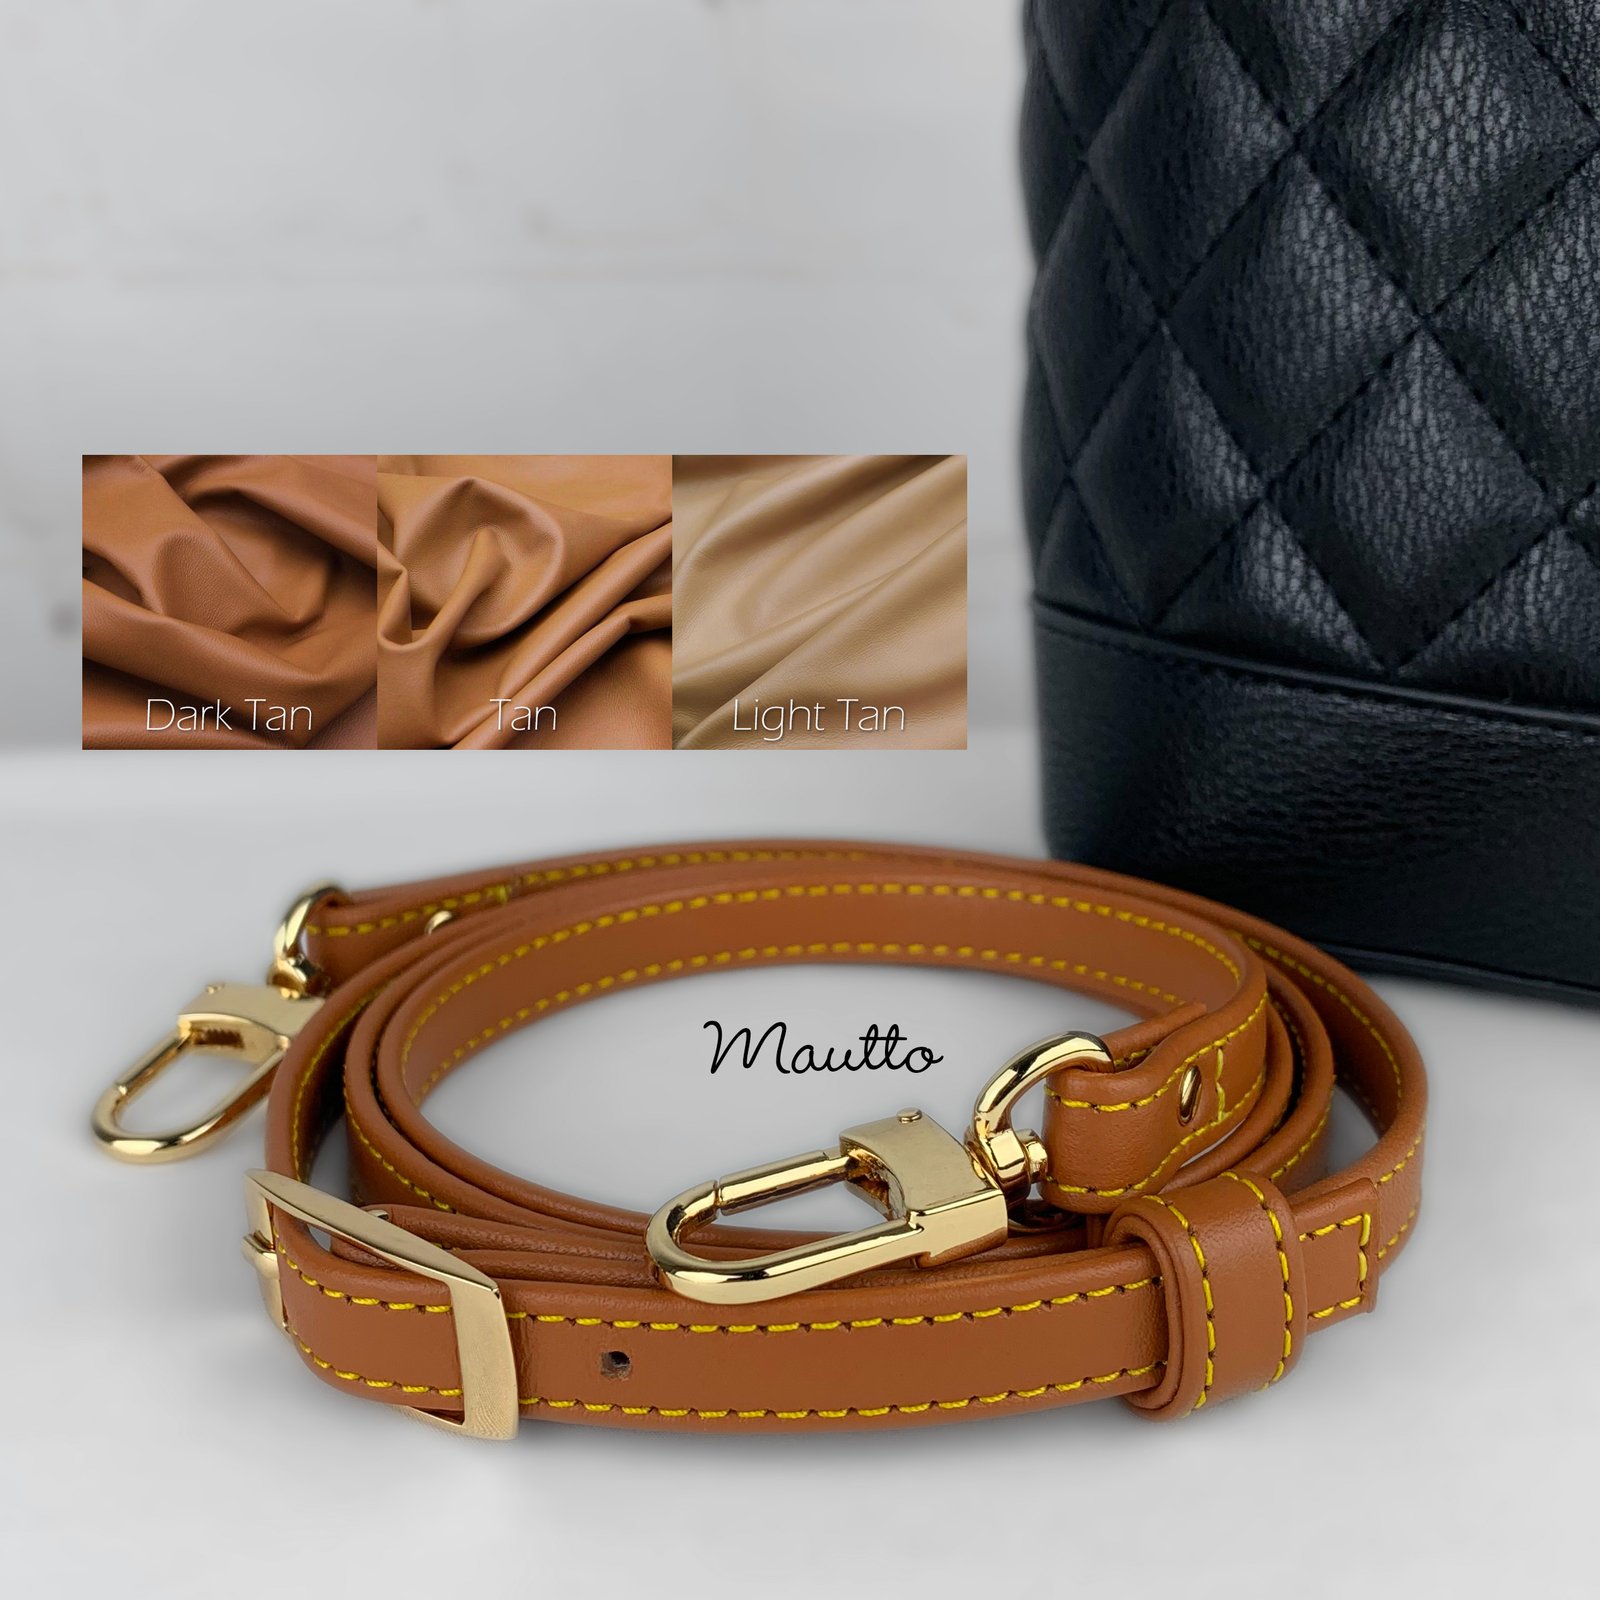 Dark Tan Leather Strap with Yellow Stitching for Louis Vuitton, Coach &  More - .75 Standard Width, Replacement Purse Straps & Handbag Accessories  - Leather, Chain & more